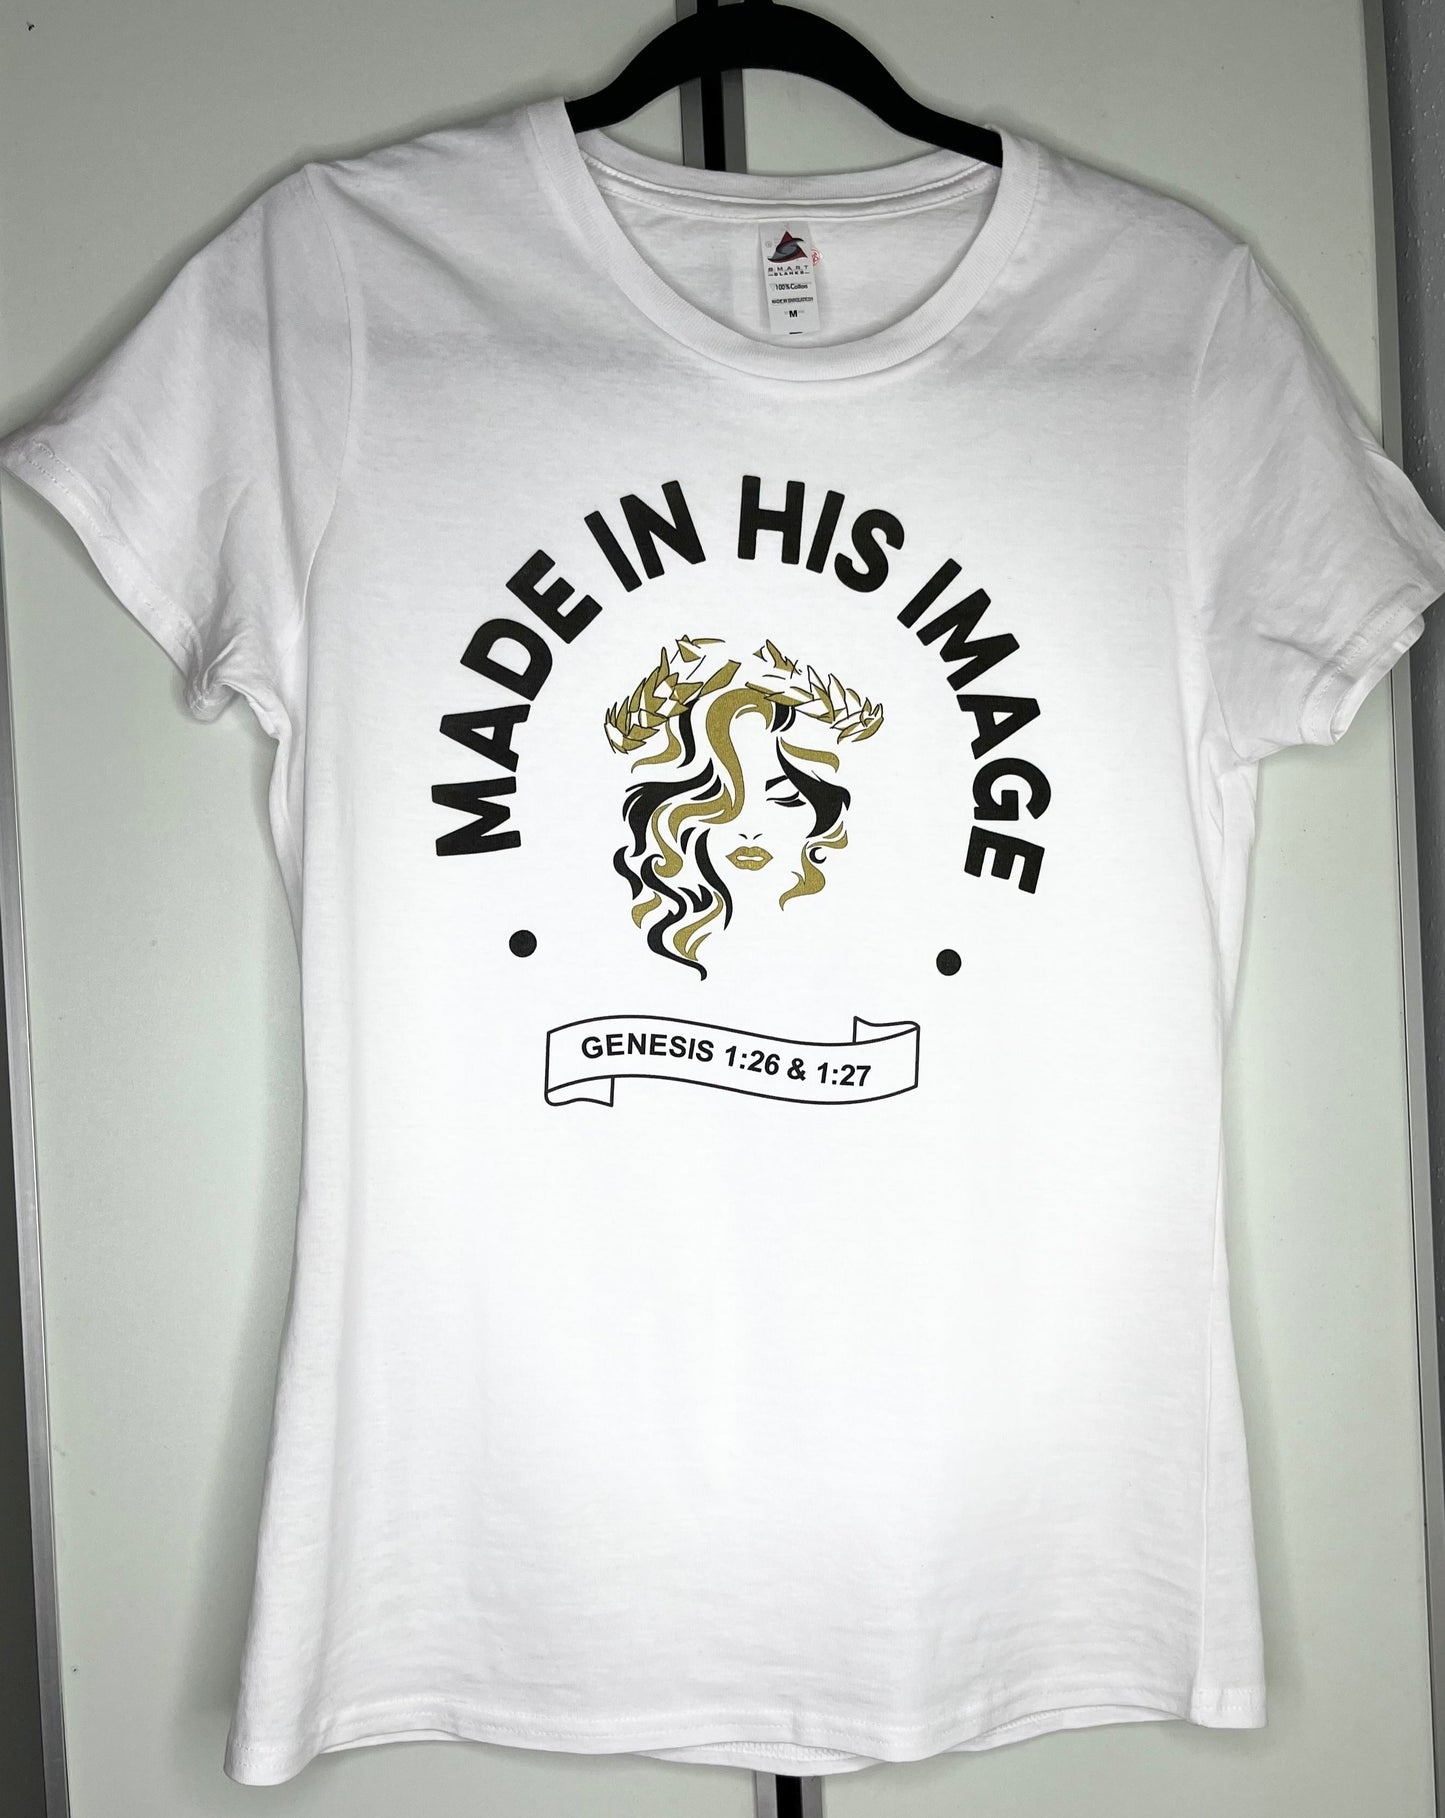 Made in His image T-Shirt